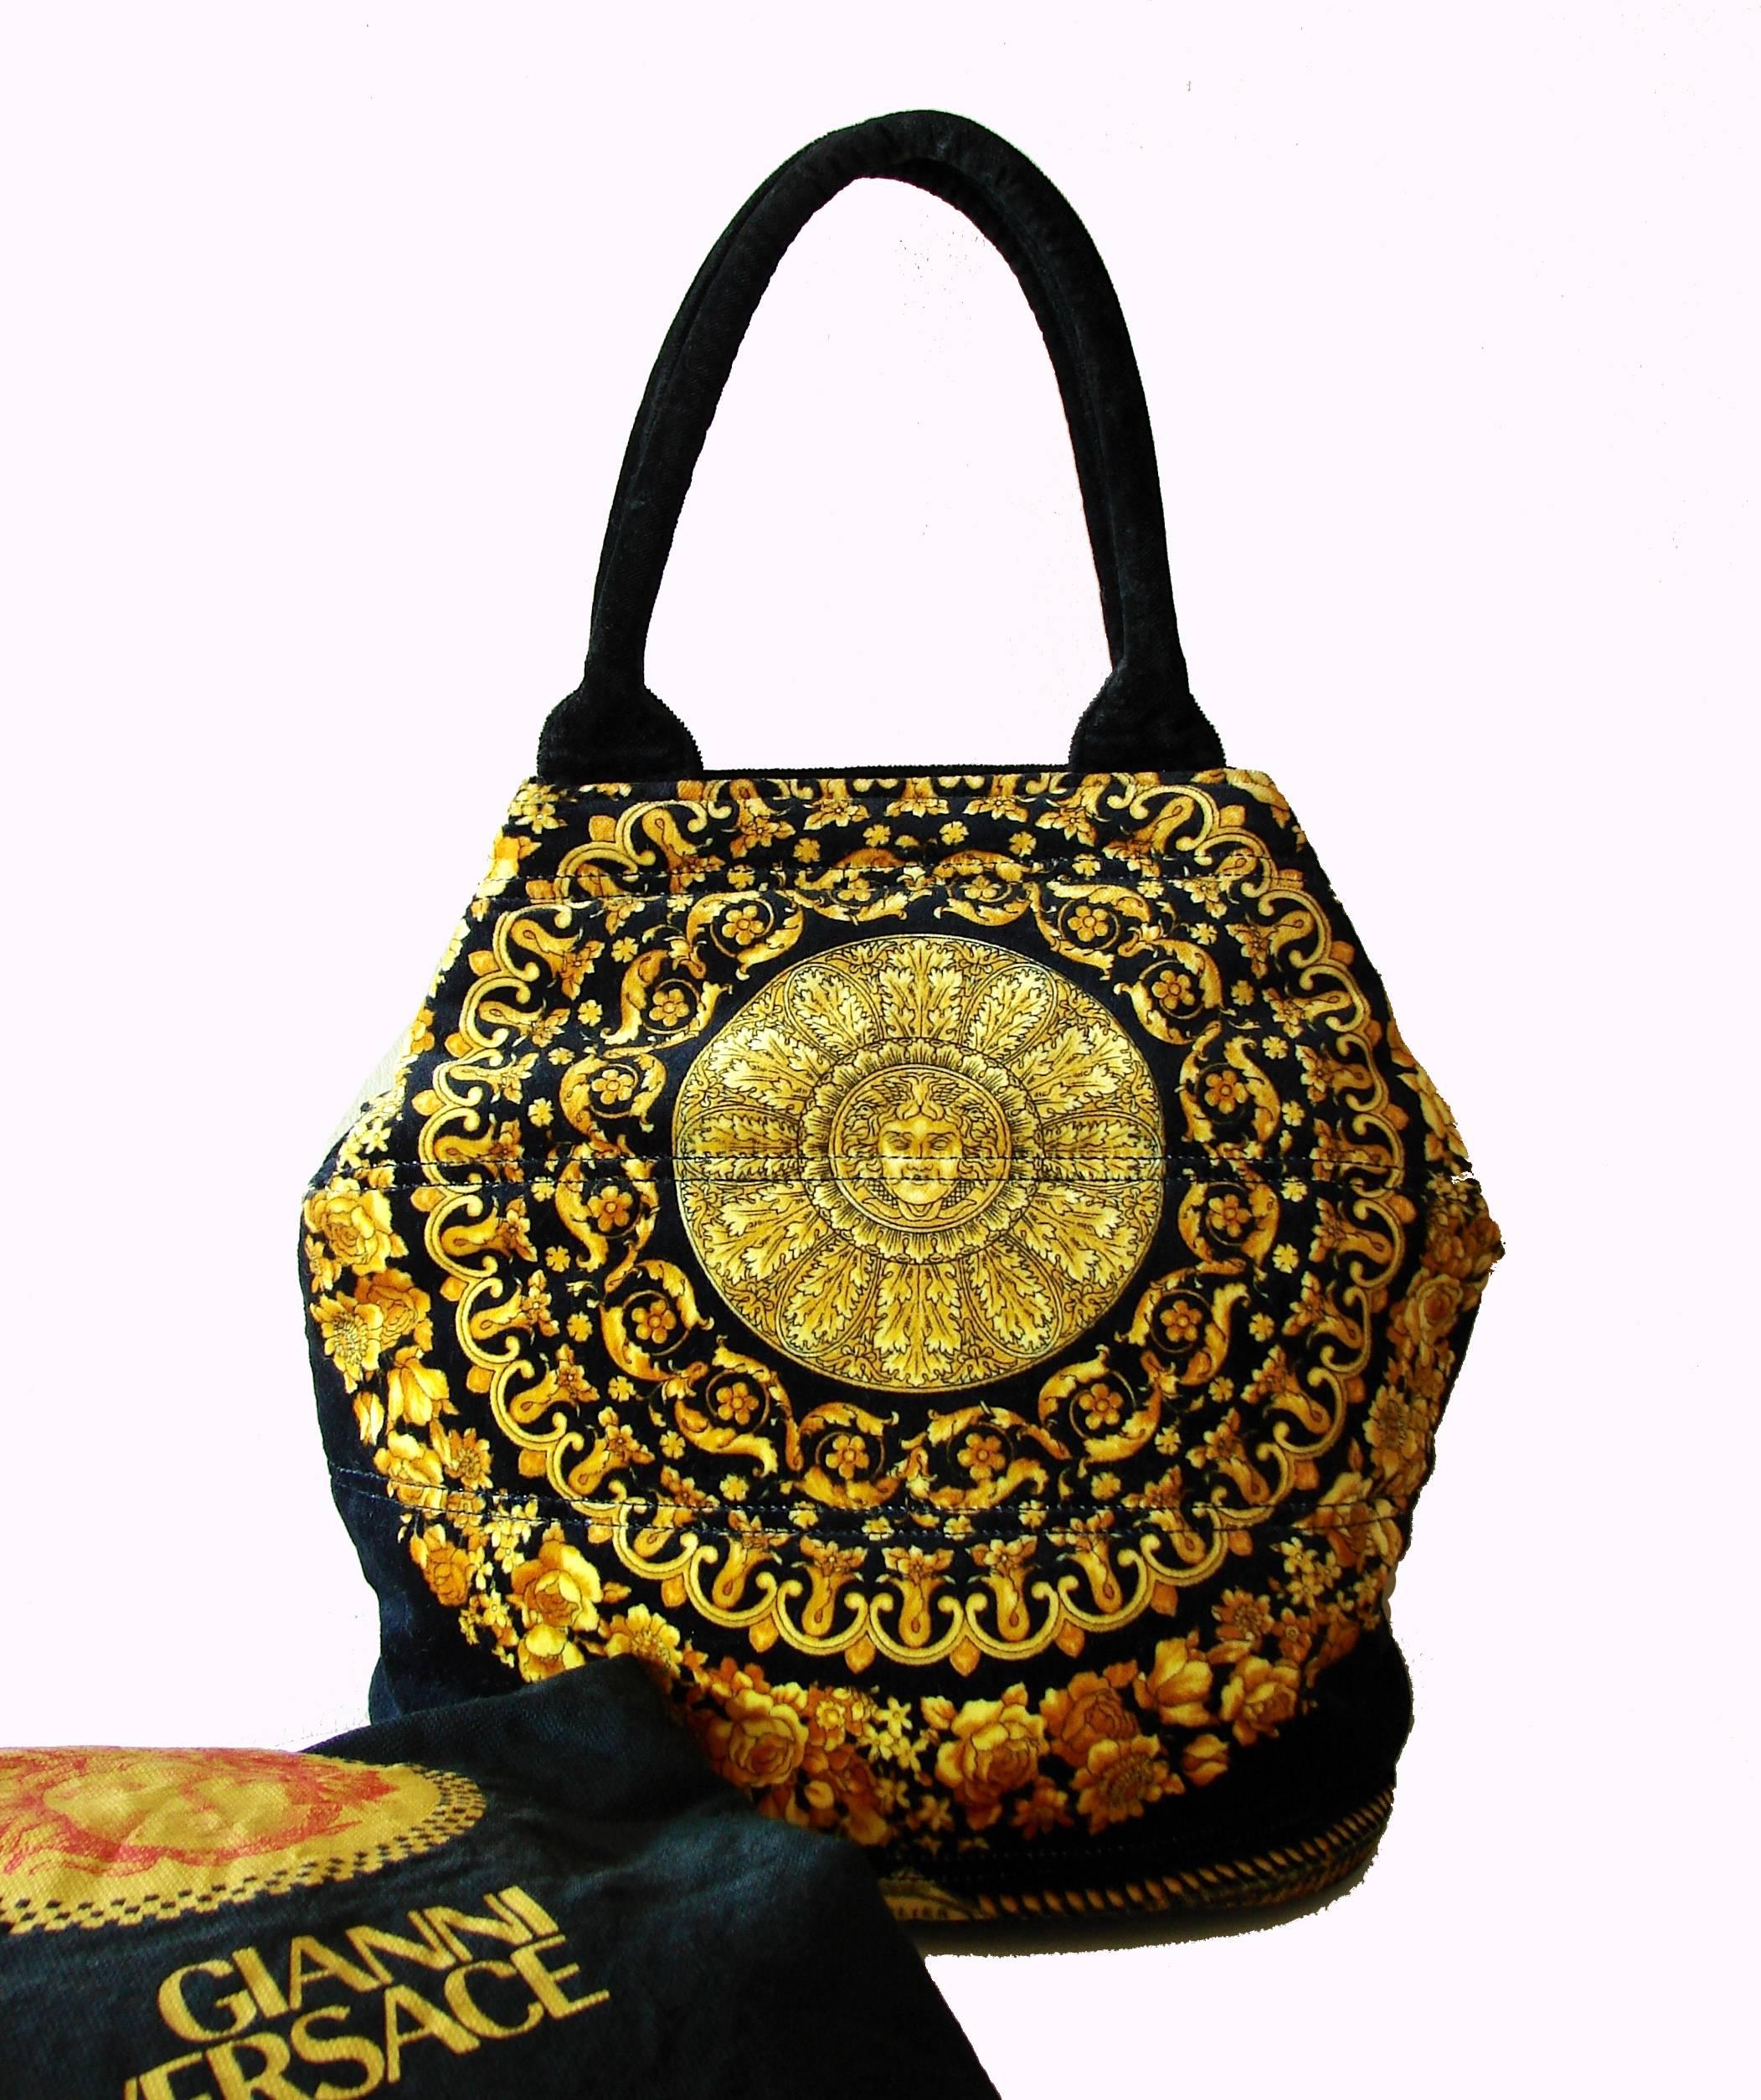 This incredible bag was made in the early 1990s by Versace for his couture label - very similar to the reboot of baroque designs that Donatella recently showed at Milan Fashion week.  Made from black velvet, it features the signature Medusa head in